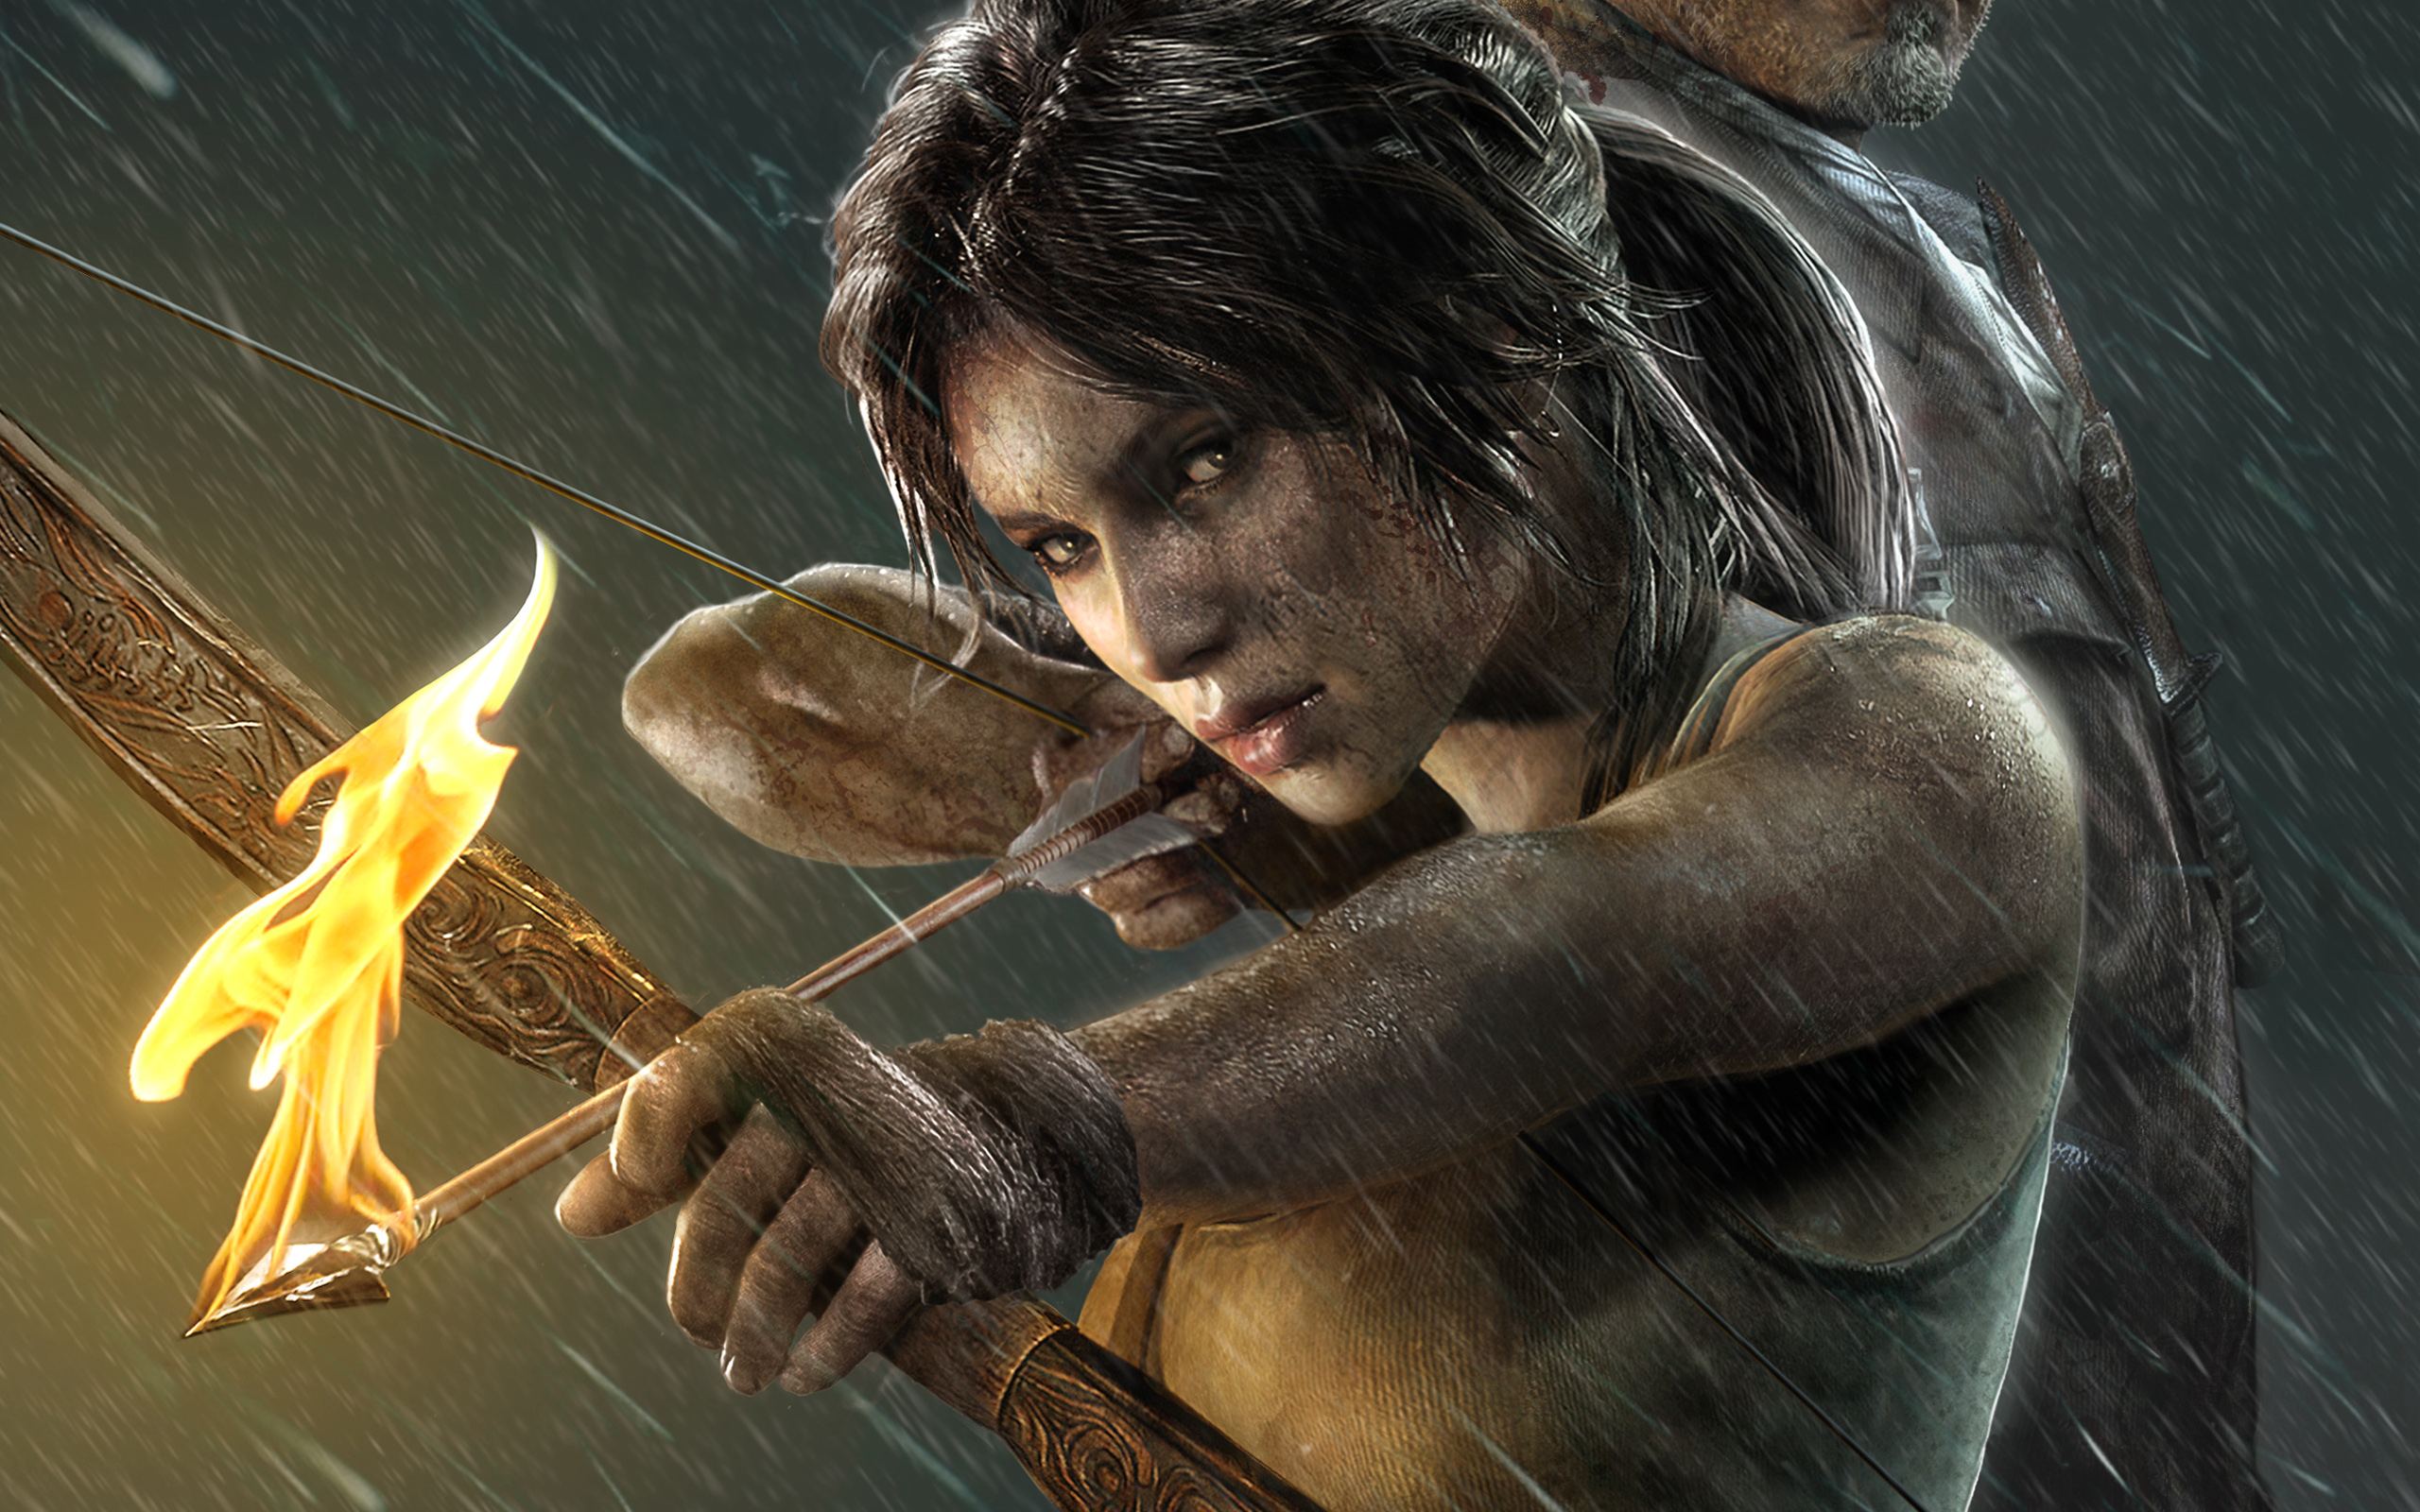 Deadline reports that Snow White and the Huntsman and Divergent scribe Evan Daugherty has been set to script the Tomb Raider reboot, with the report making ...